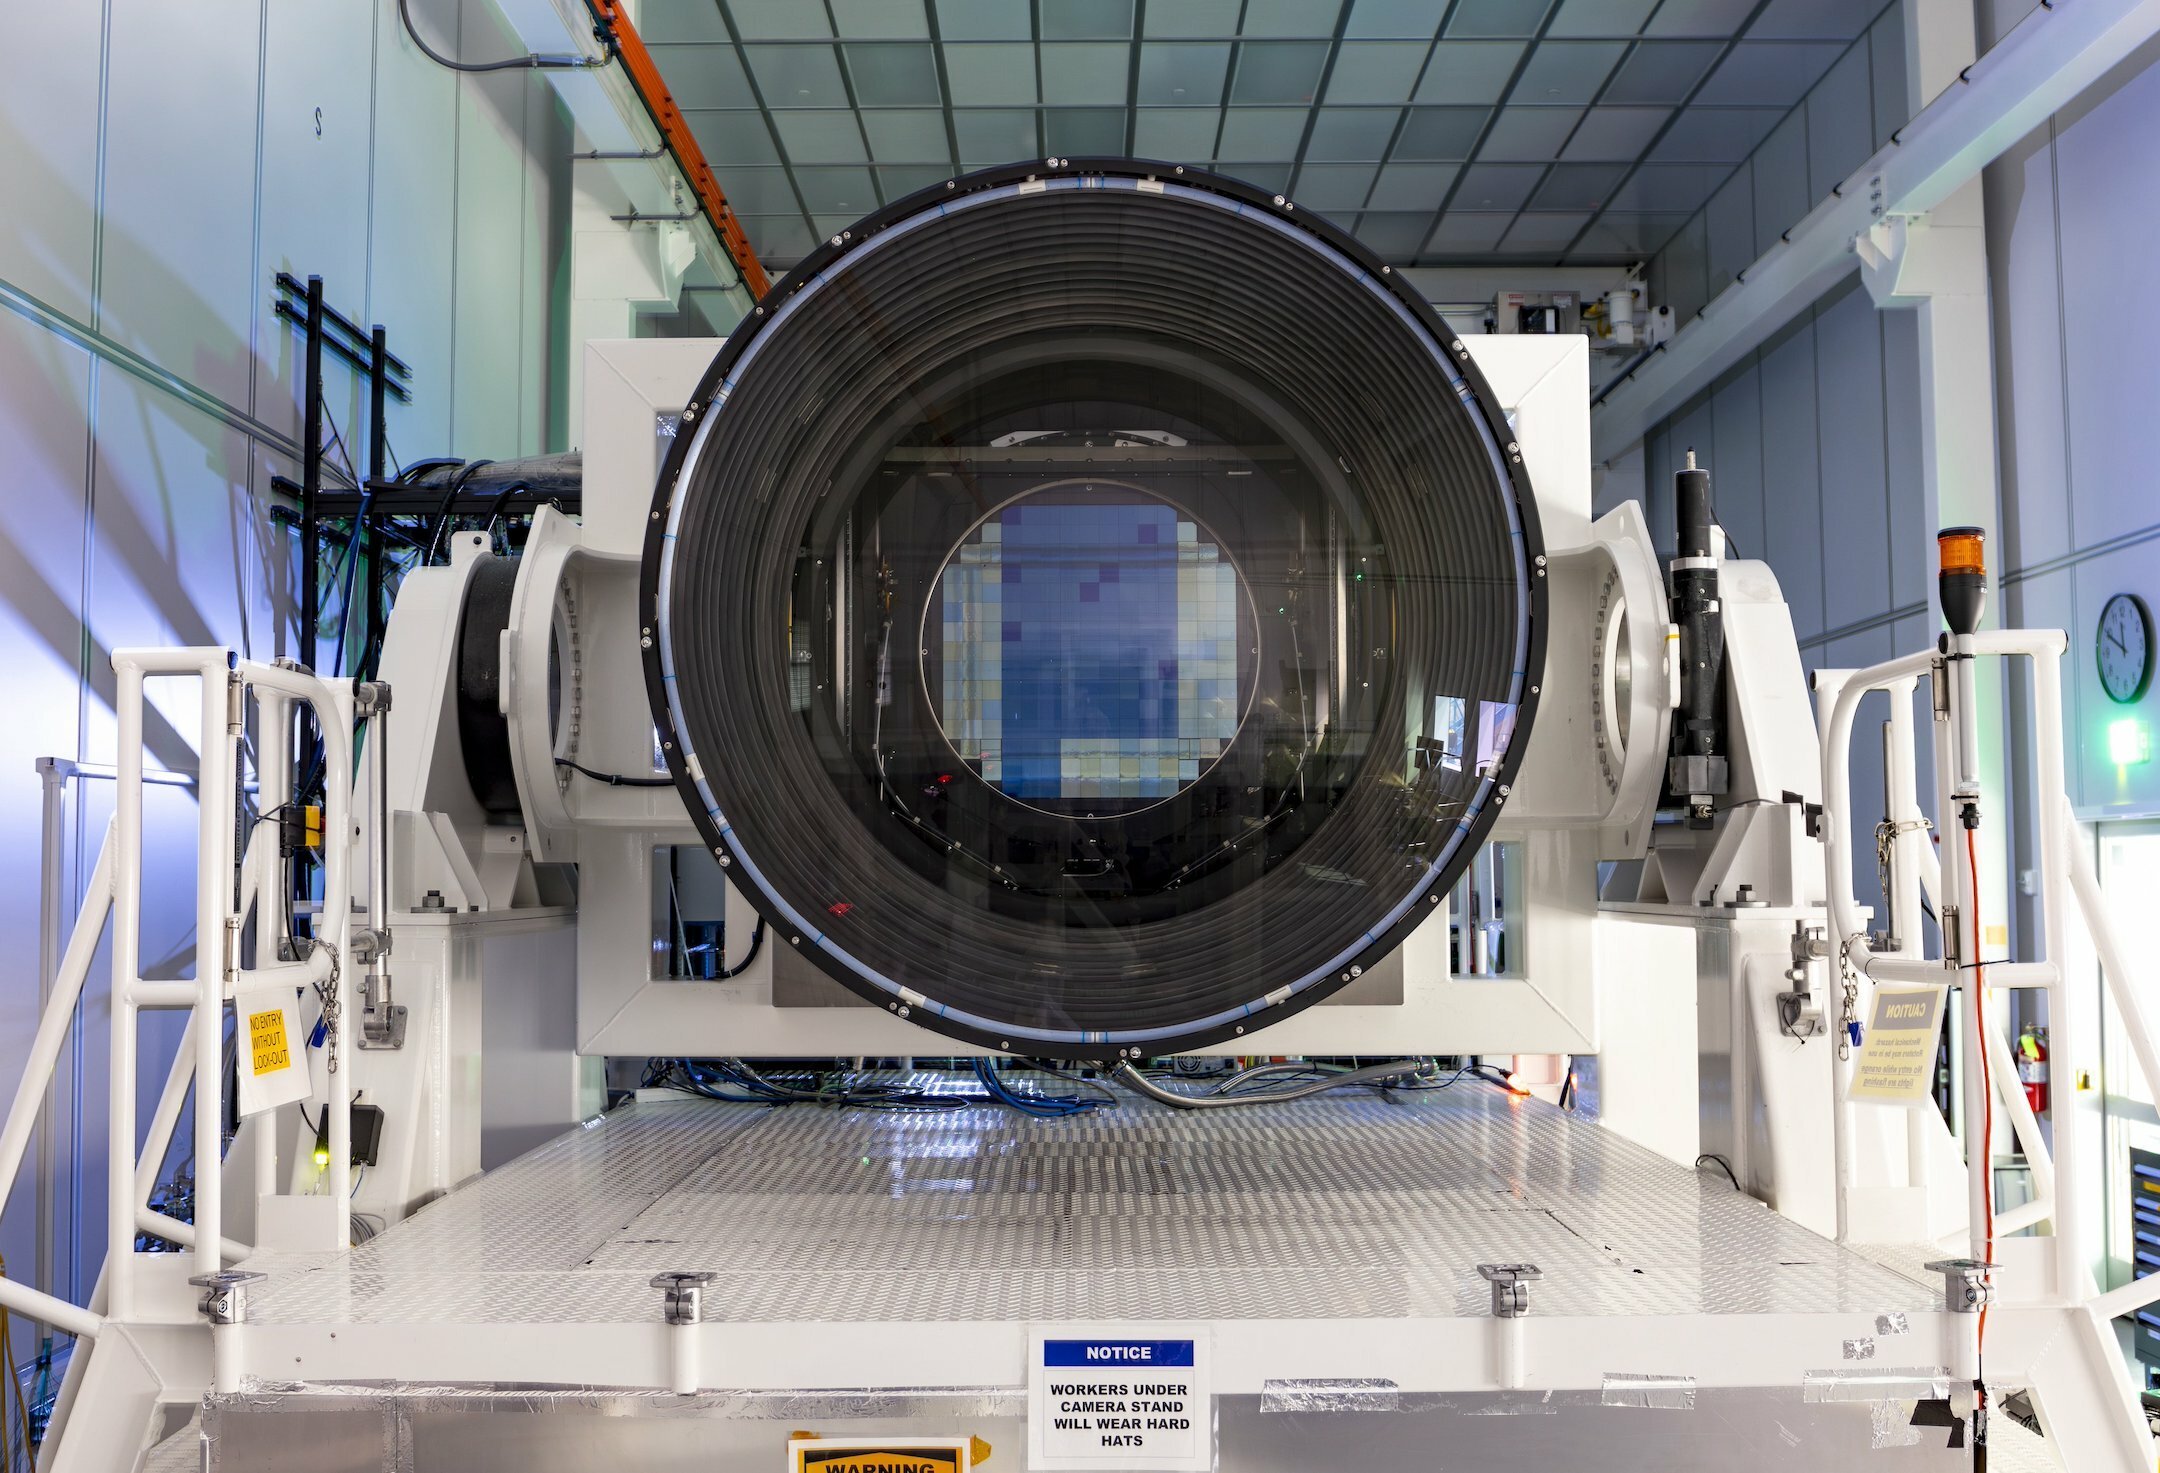 A view of the LSST camera in its cleanroom at the SLAC National Accelerator Laboratory.